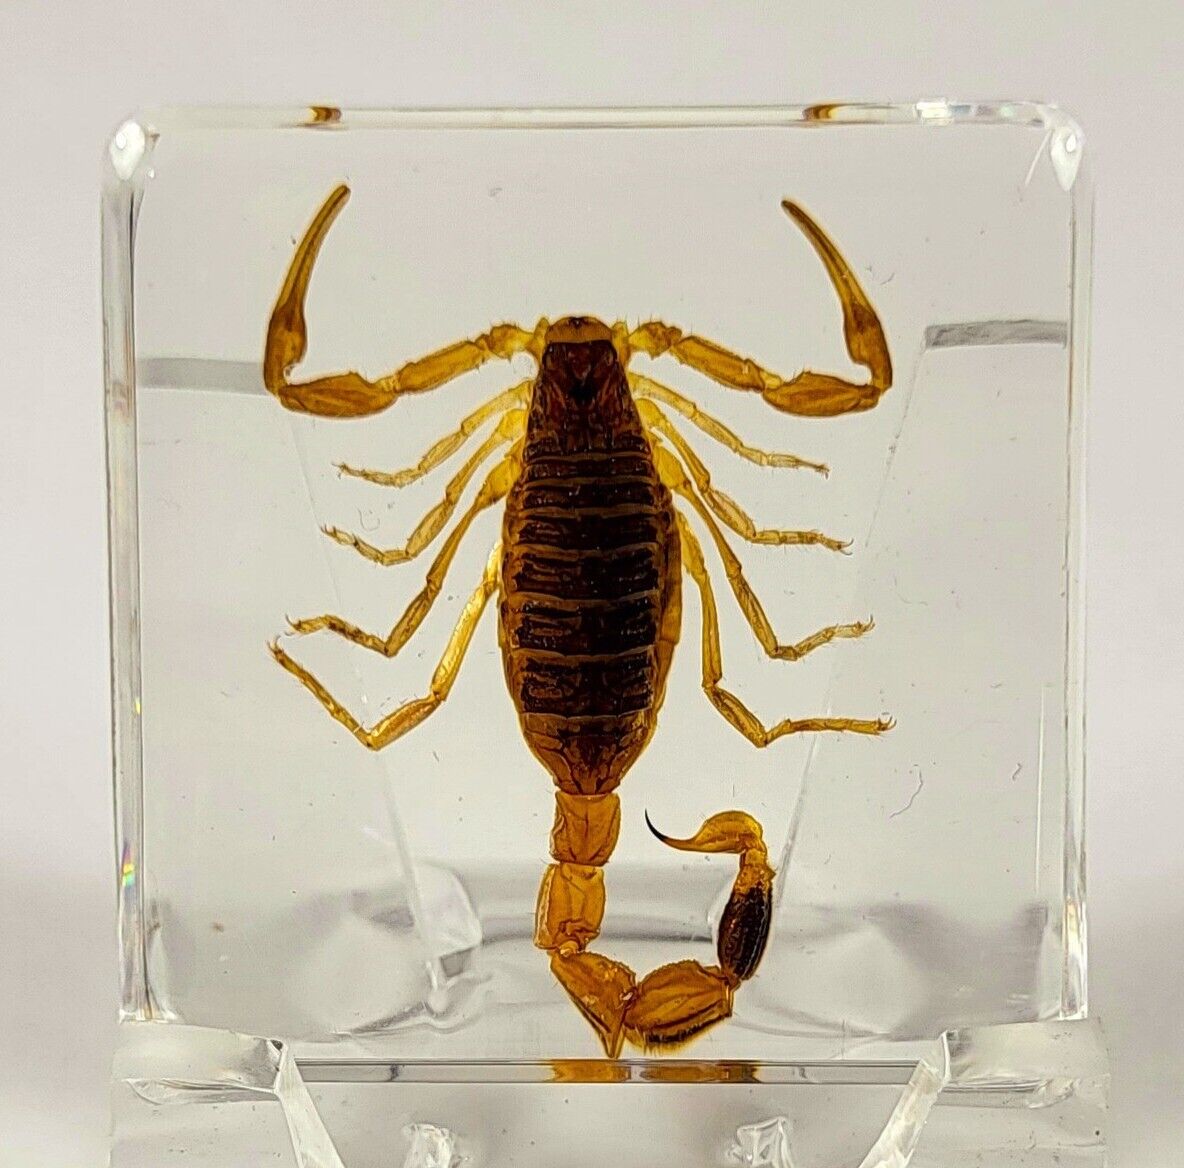 38mm Golden Scorpion in Clear Lucite Resin Science Education Collection Specimen